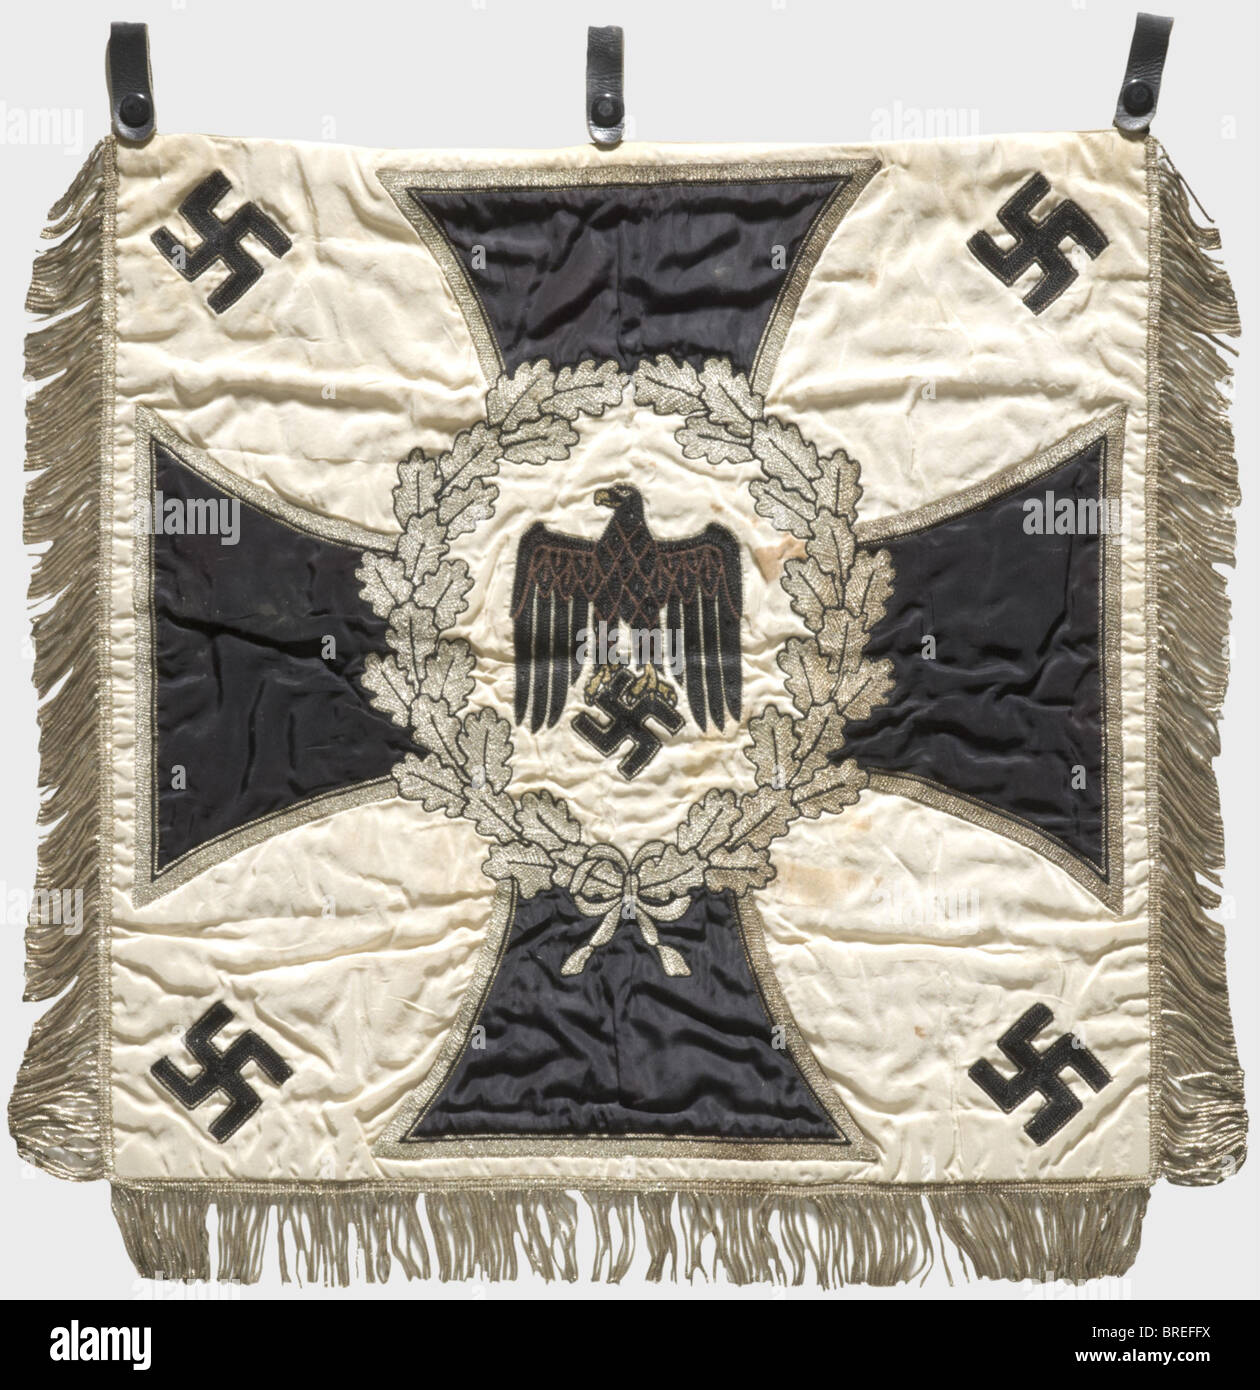 A trumpet banner, of the 1st Battalion/12th Infantry Regiment White silk cloth with an army eagle embroidered in black and brown surrounded by a silver-embroidered oak leaf wreath over an iron cross and four applied swastikas in the corners. Silver fringes on three sides. Three leather loops. On the reverse side the silver-embroidered unit name. Dimensions ca. 53 x 56 cm. Slightly stained, otherwise in very good condition with bright colours. Of great rarity. historic, historical, 1930s, 1930s, 20th century, infantry, military, armed forces, militaria, object, , Stock Photo